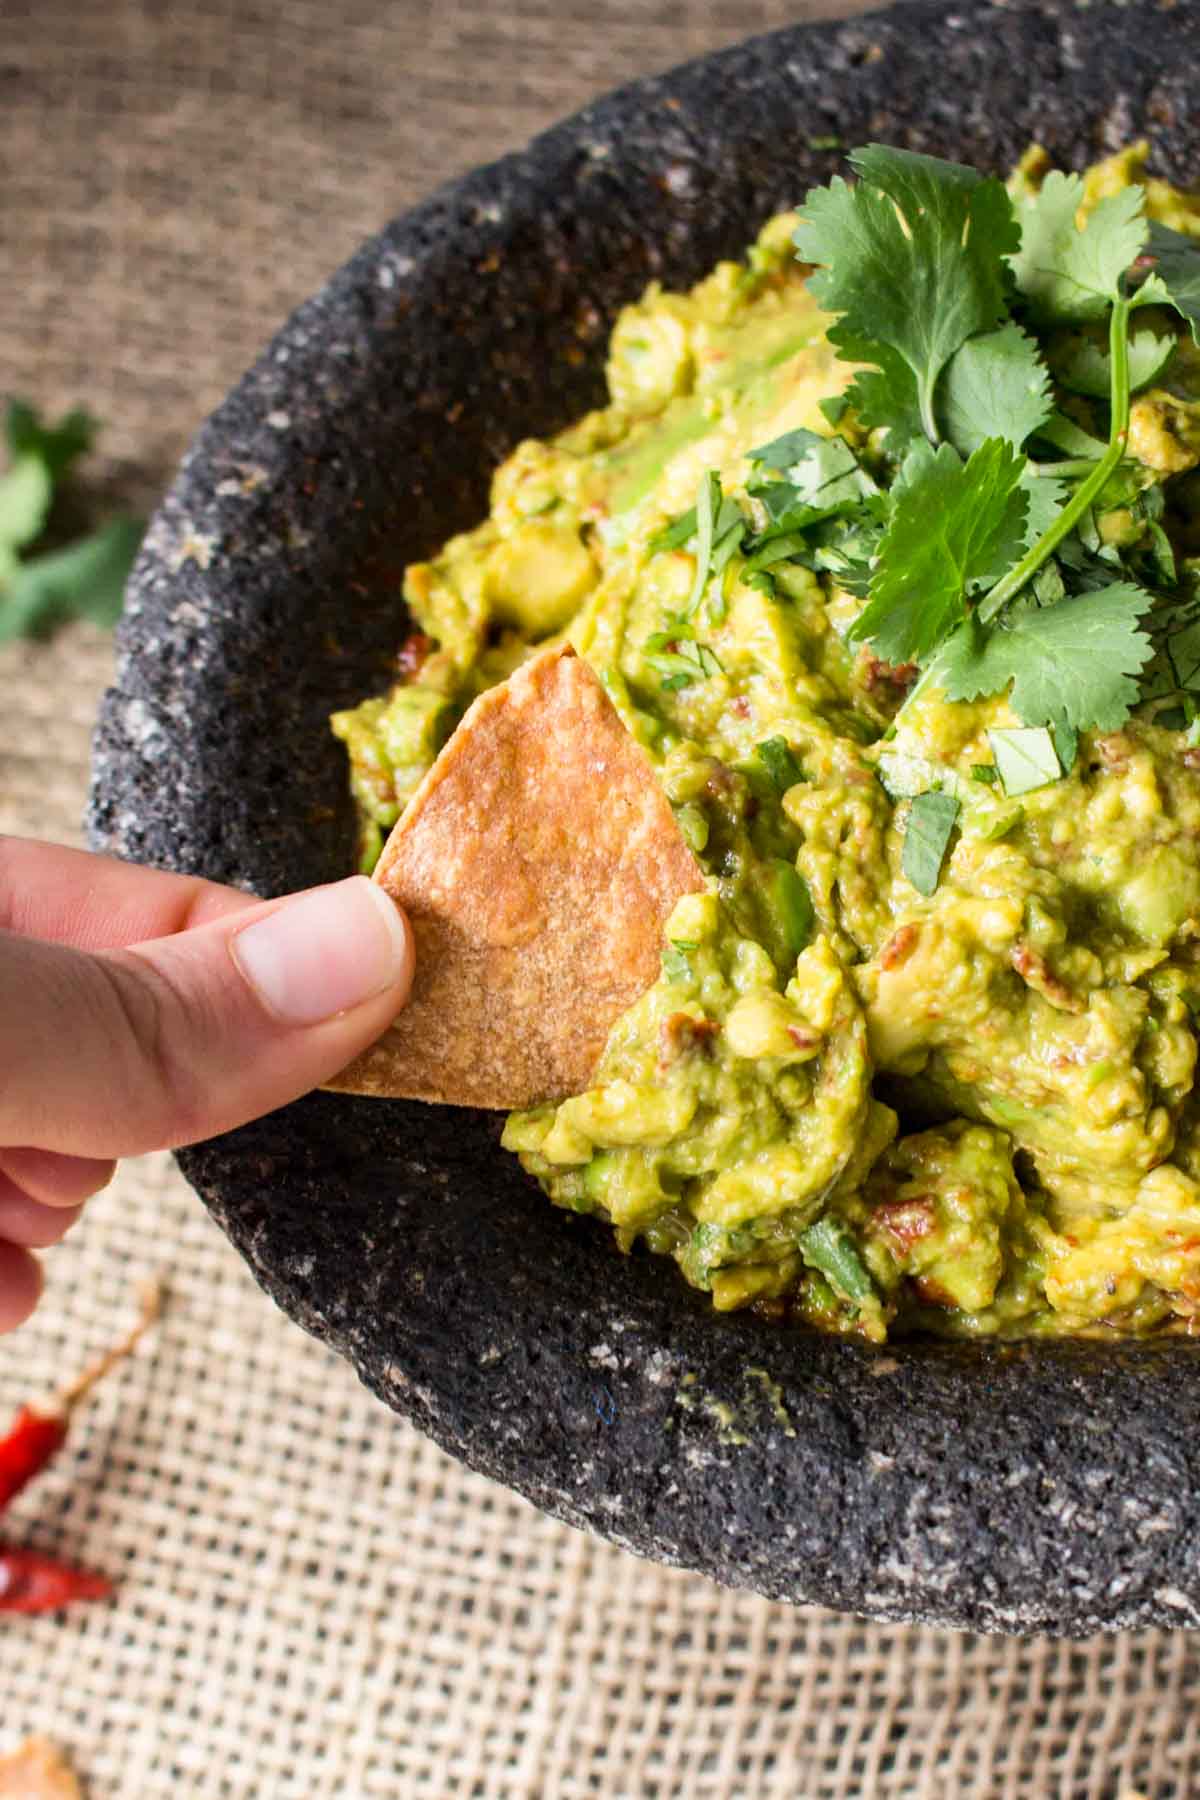 Fingers holding a tortilla chip dipping into a bowl of guacamole.